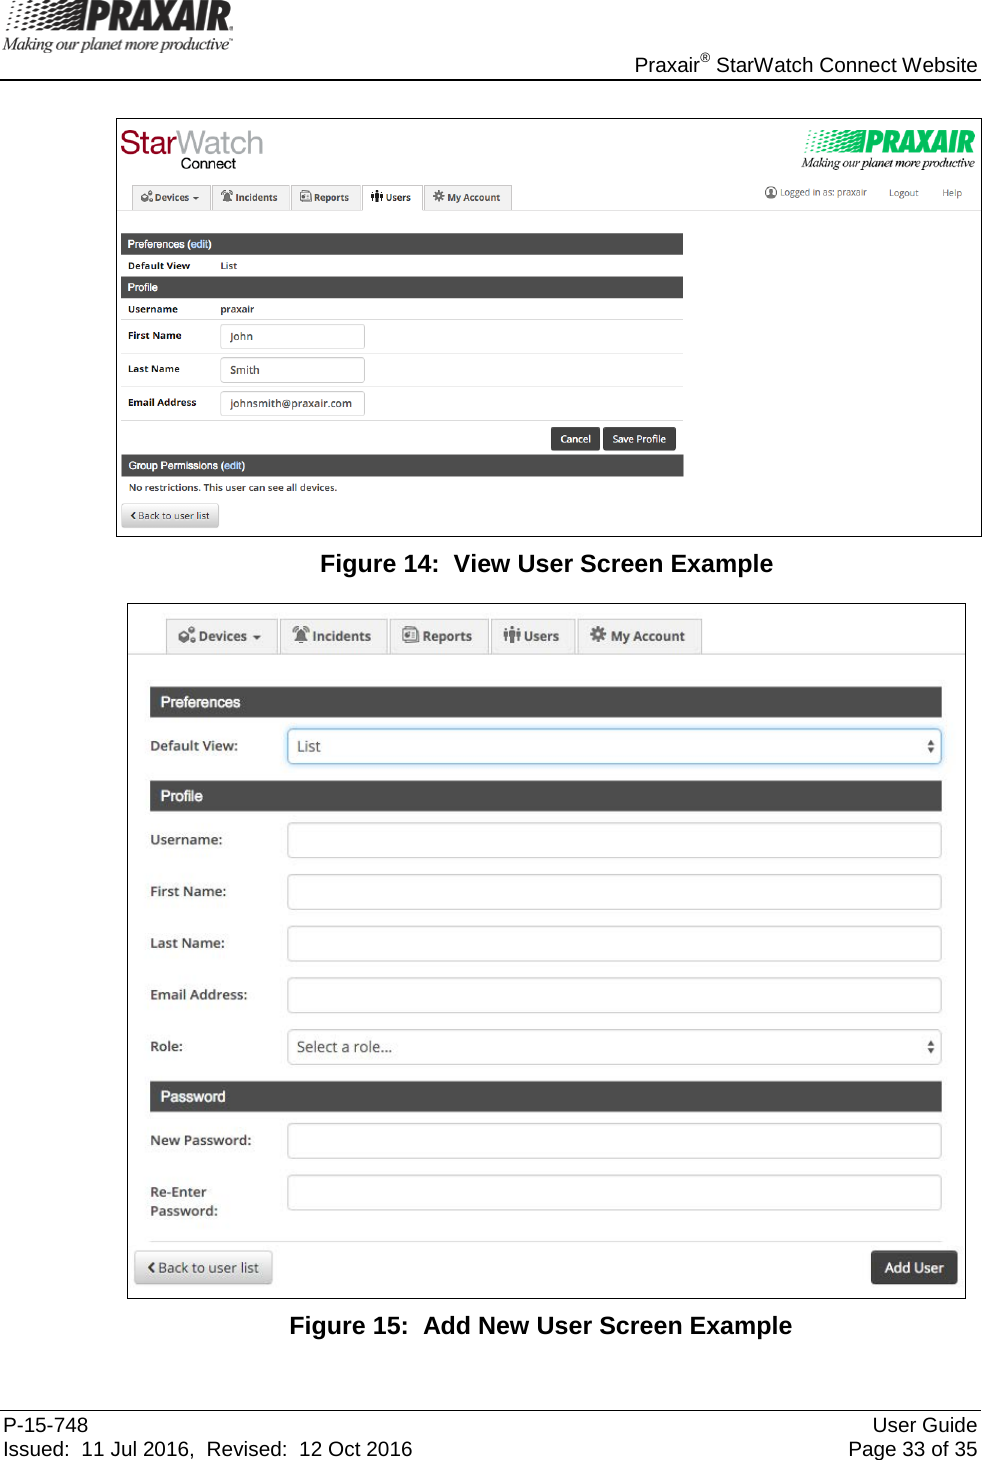    Praxair® StarWatch Connect Website P-15-748 User Guide Issued:  11 Jul 2016,  Revised:  12 Oct 2016 Page 33 of 35   Figure 14:  View User Screen Example   Figure 15:  Add New User Screen Example  